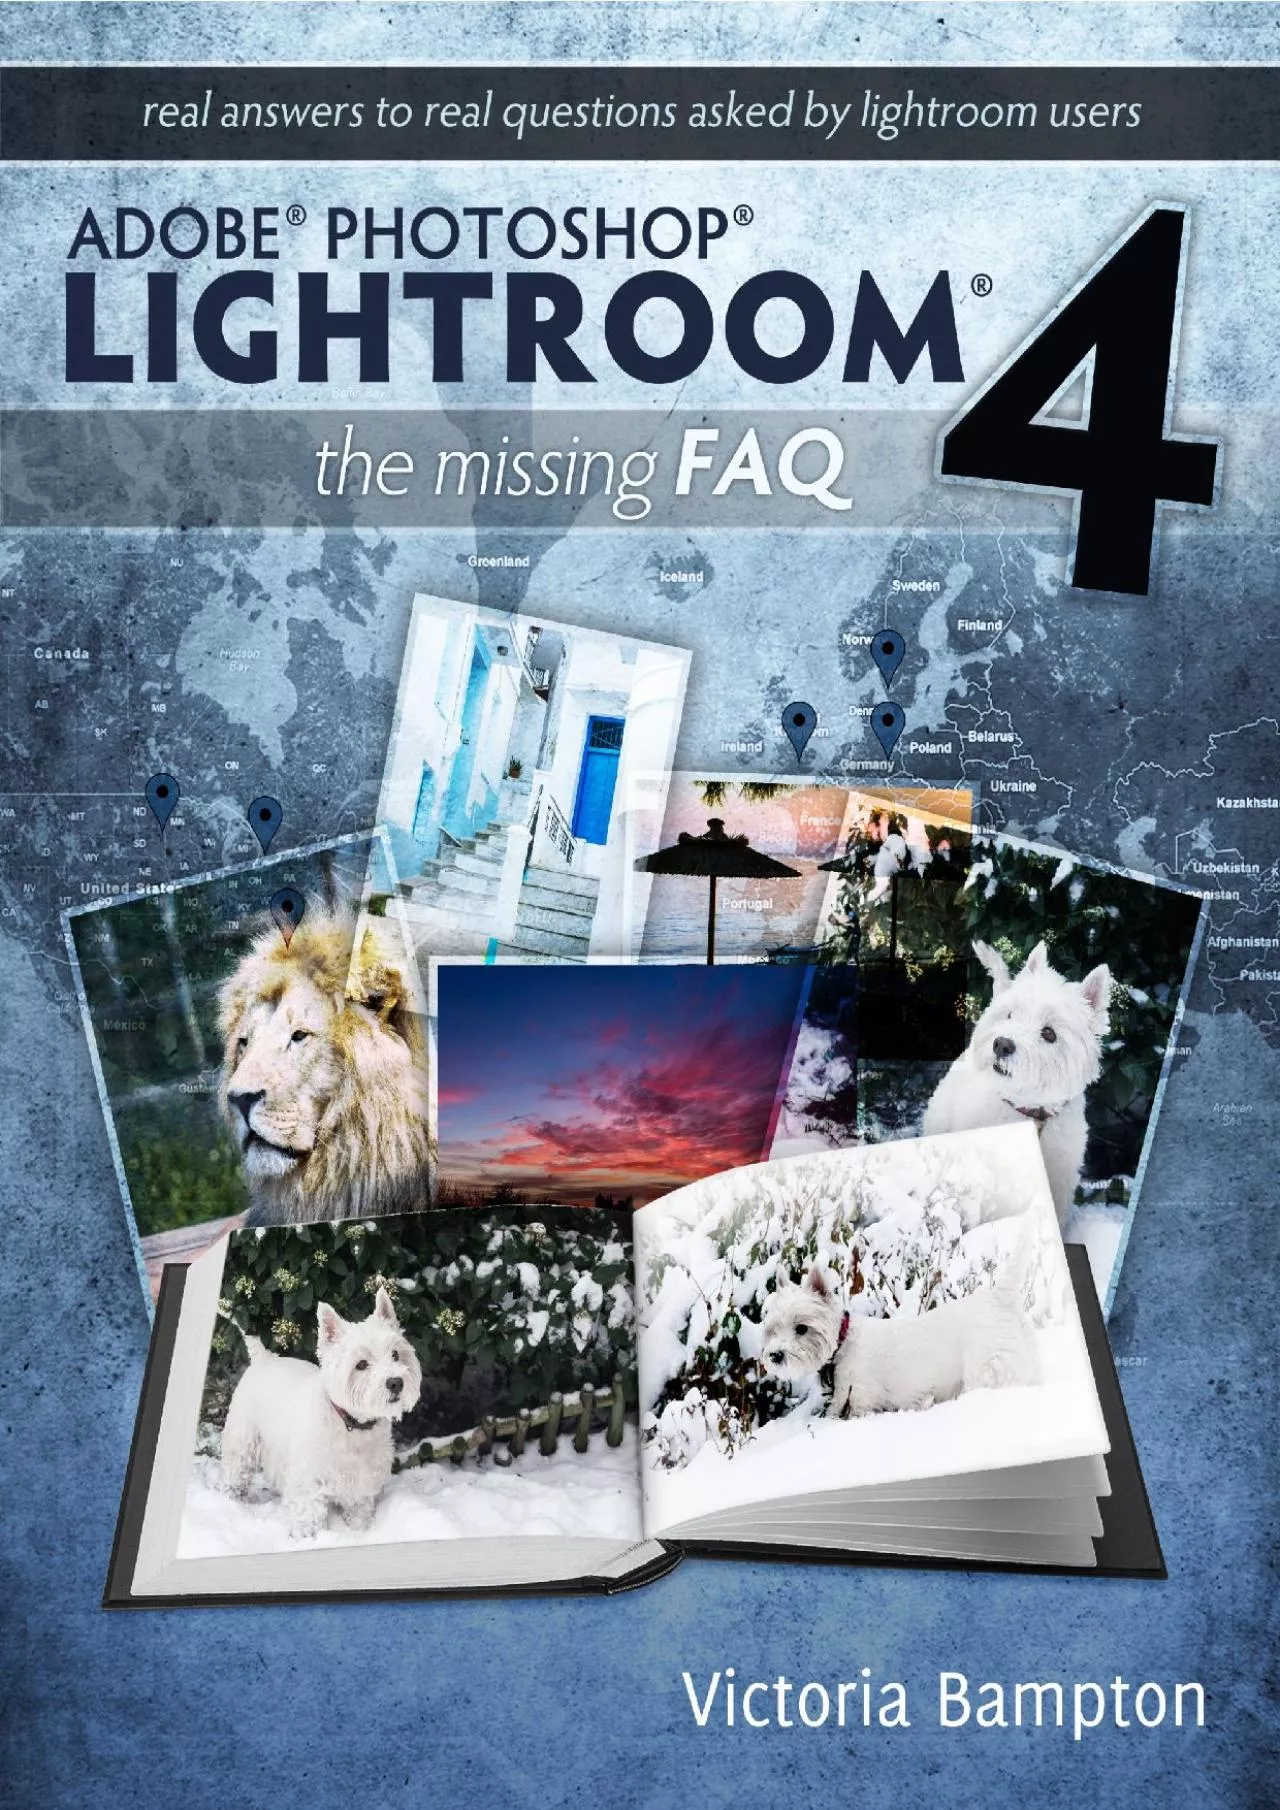 (DOWNLOAD)-Adobe Photoshop Lightroom 4 - The Missing FAQ - Real Answers to Real Questions